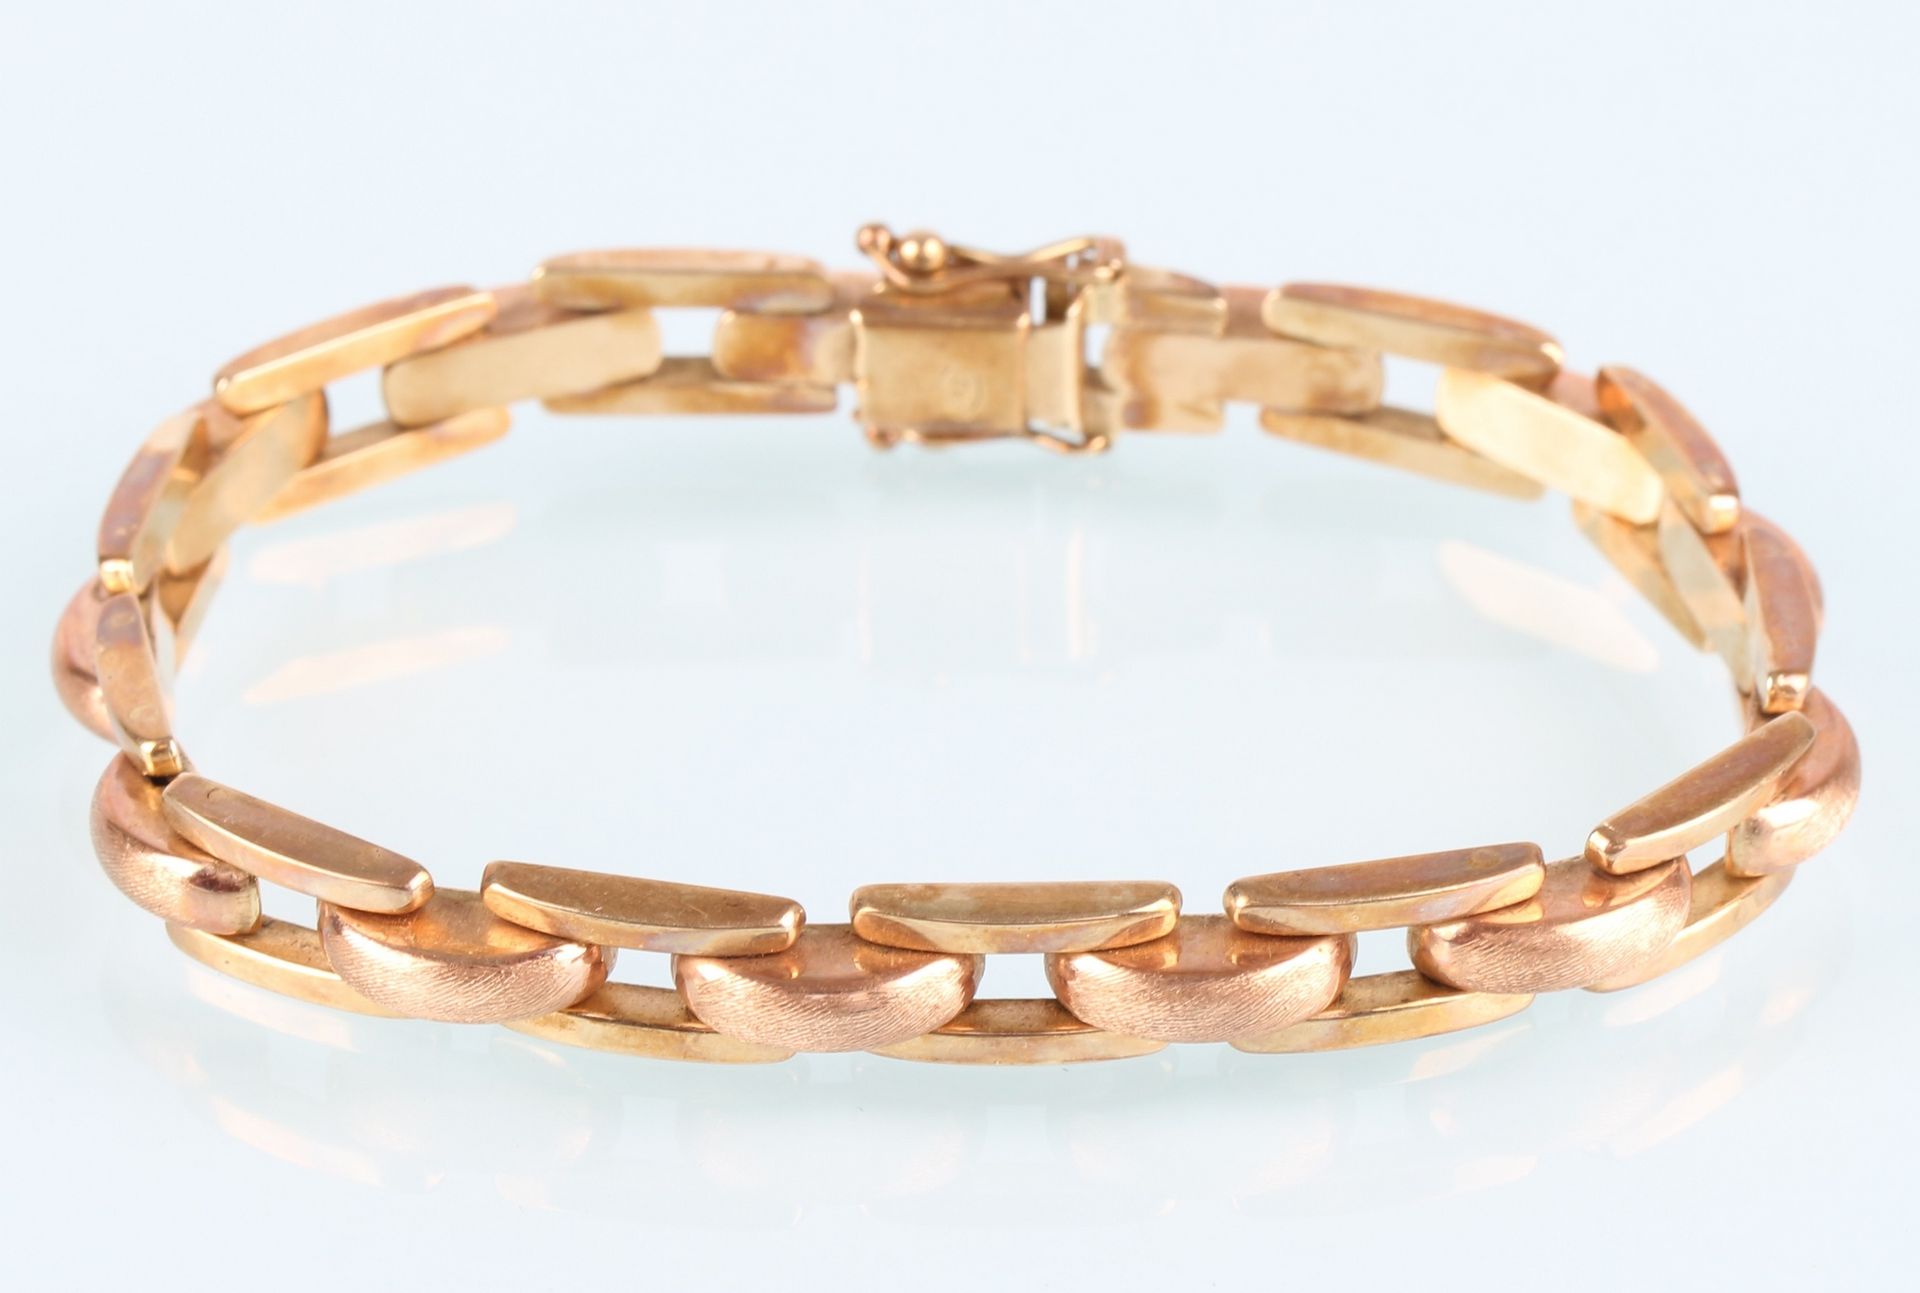 585 Gold Bicolor Armband, 14K gold bracelet, GG/ RG 585/000 yellow and red gold,&hellip;